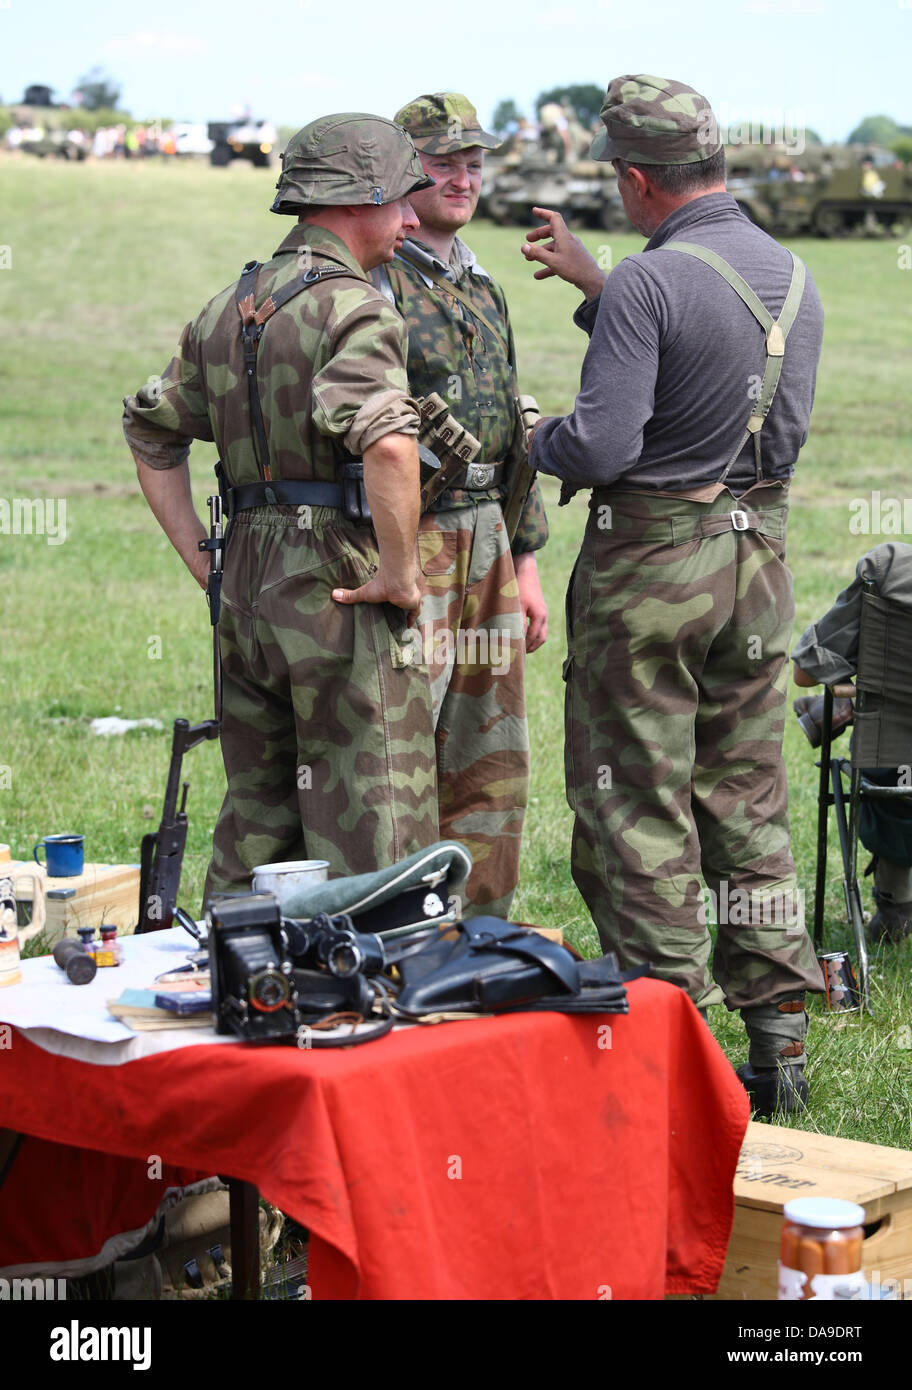 WW2 re enactment showing German soldiers Stock Photo - Alamy